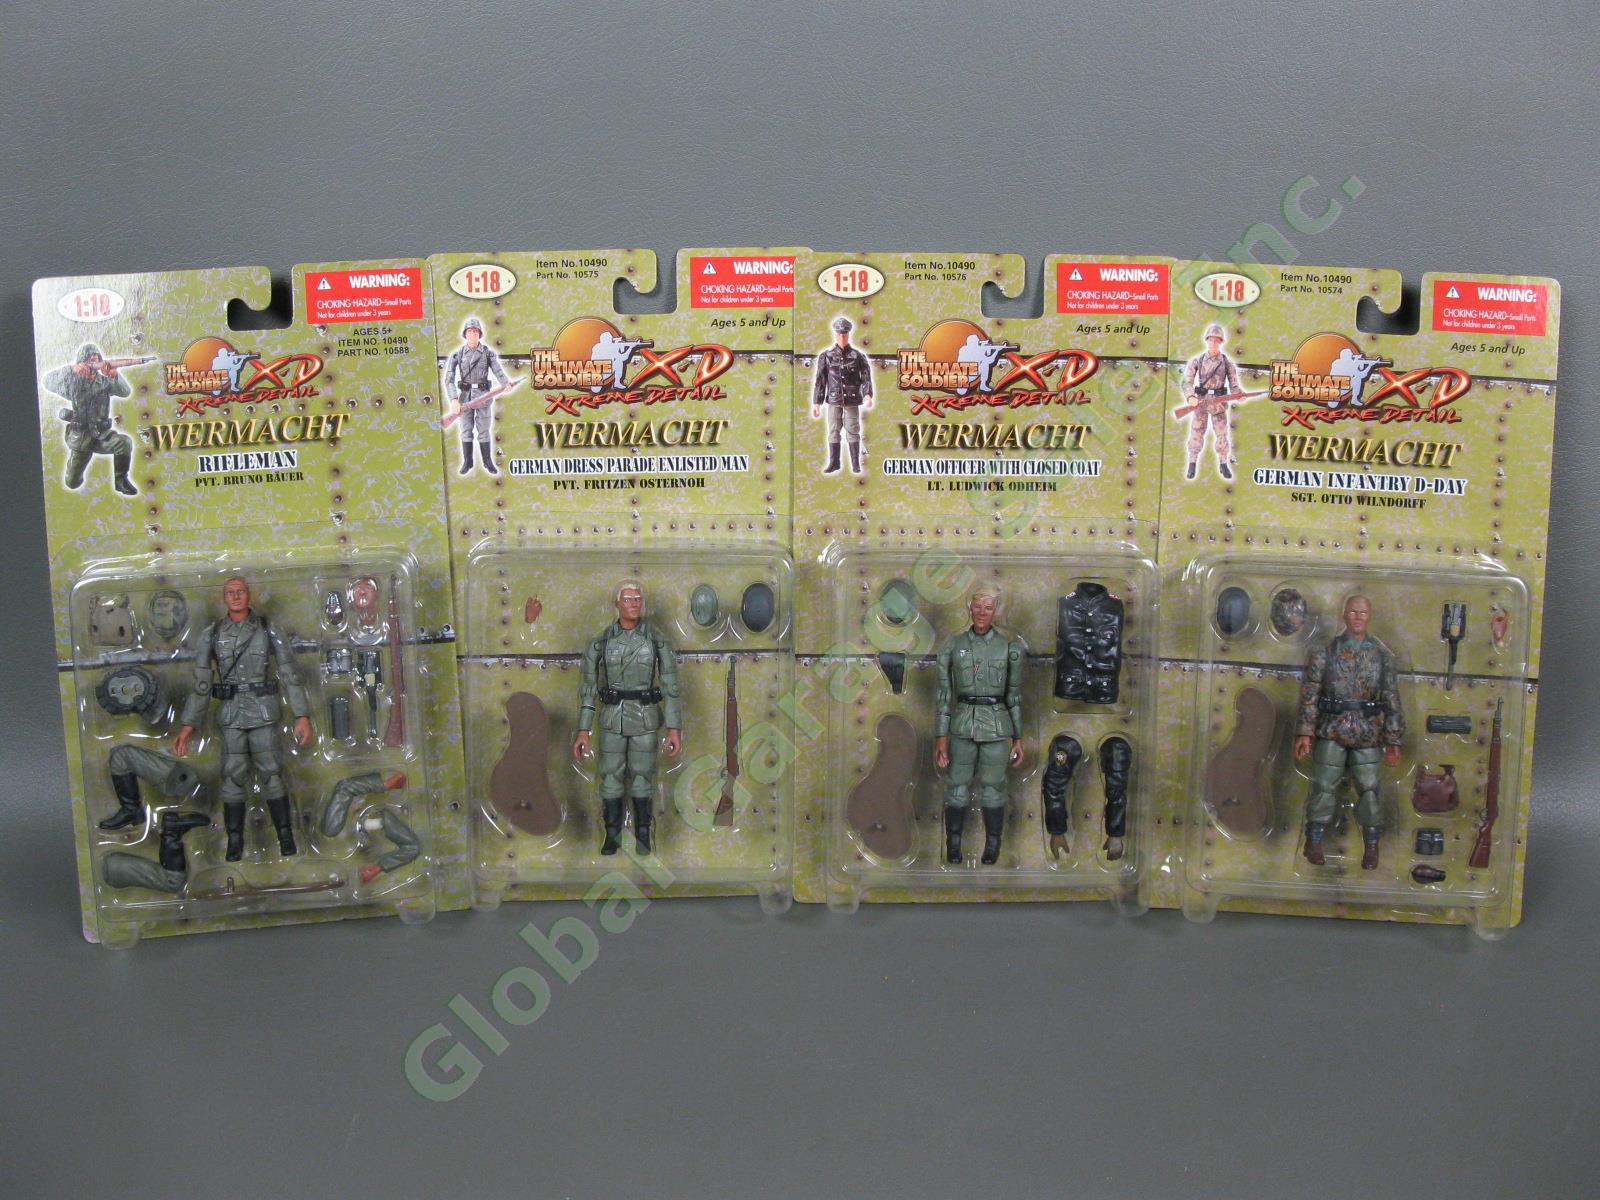 4 Ultimate Soldier XD 1/18 WWII German Wehrmacht Figure Set D-Day Infantry Lot